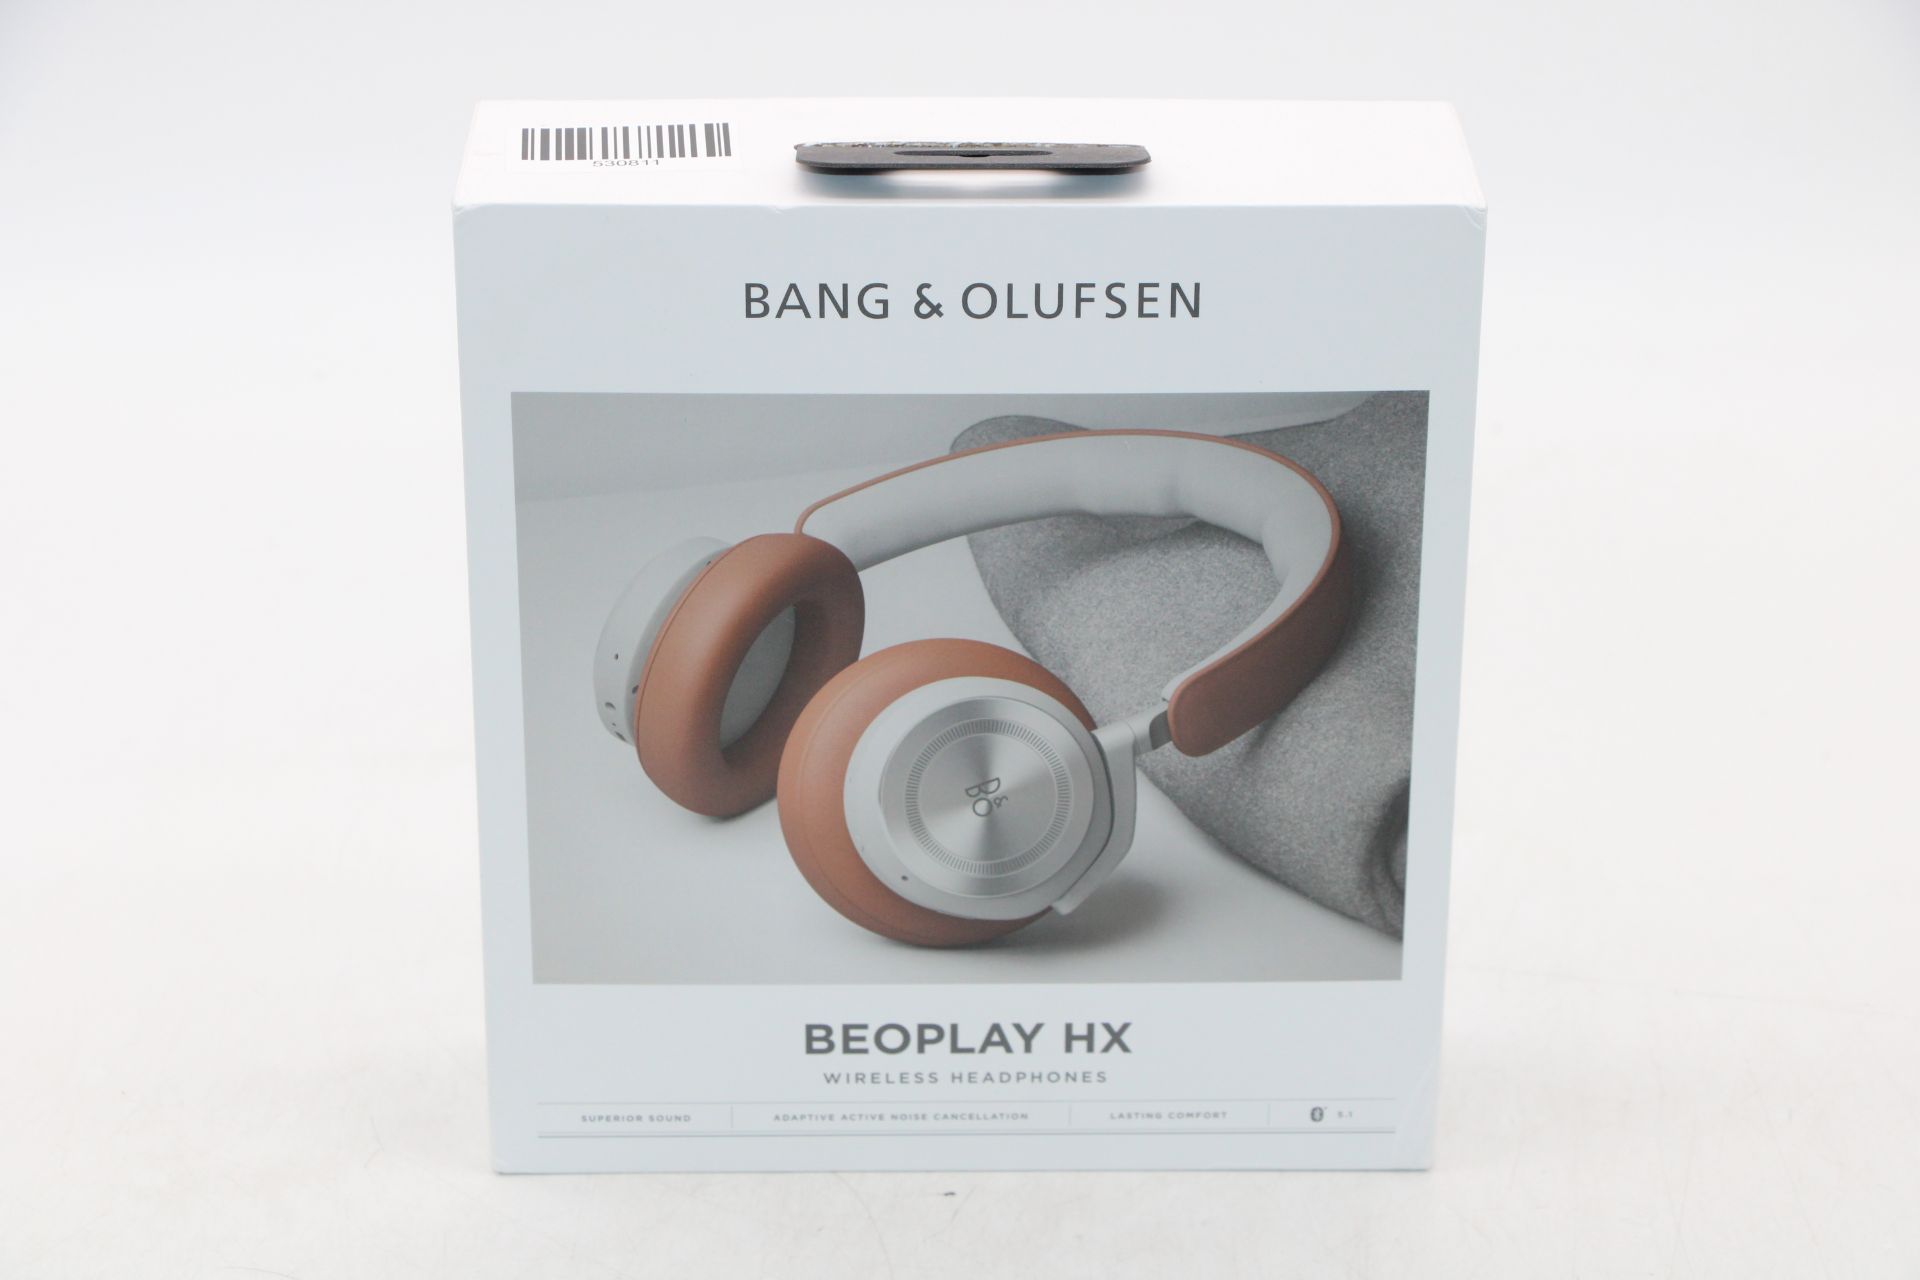 Bang & Olufsen Beoplay HX Wireless Noise Cancelling Over-Ear Headphones, Timber/Grey - Image 2 of 2